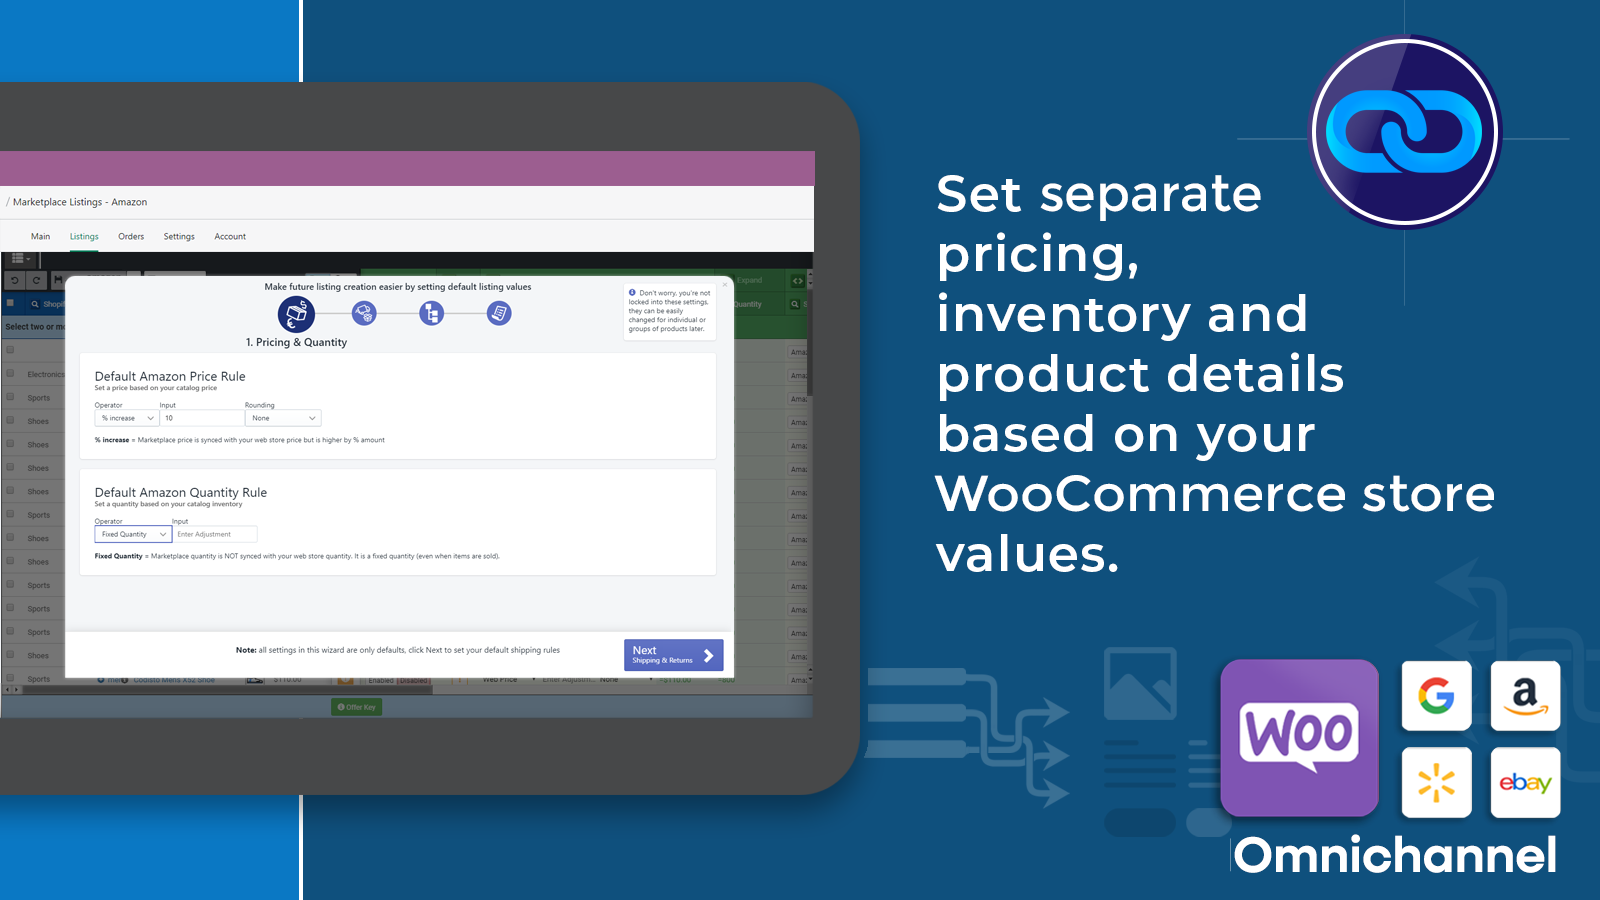 Set separate pricing inventory, and product details based on your WooCommerce values